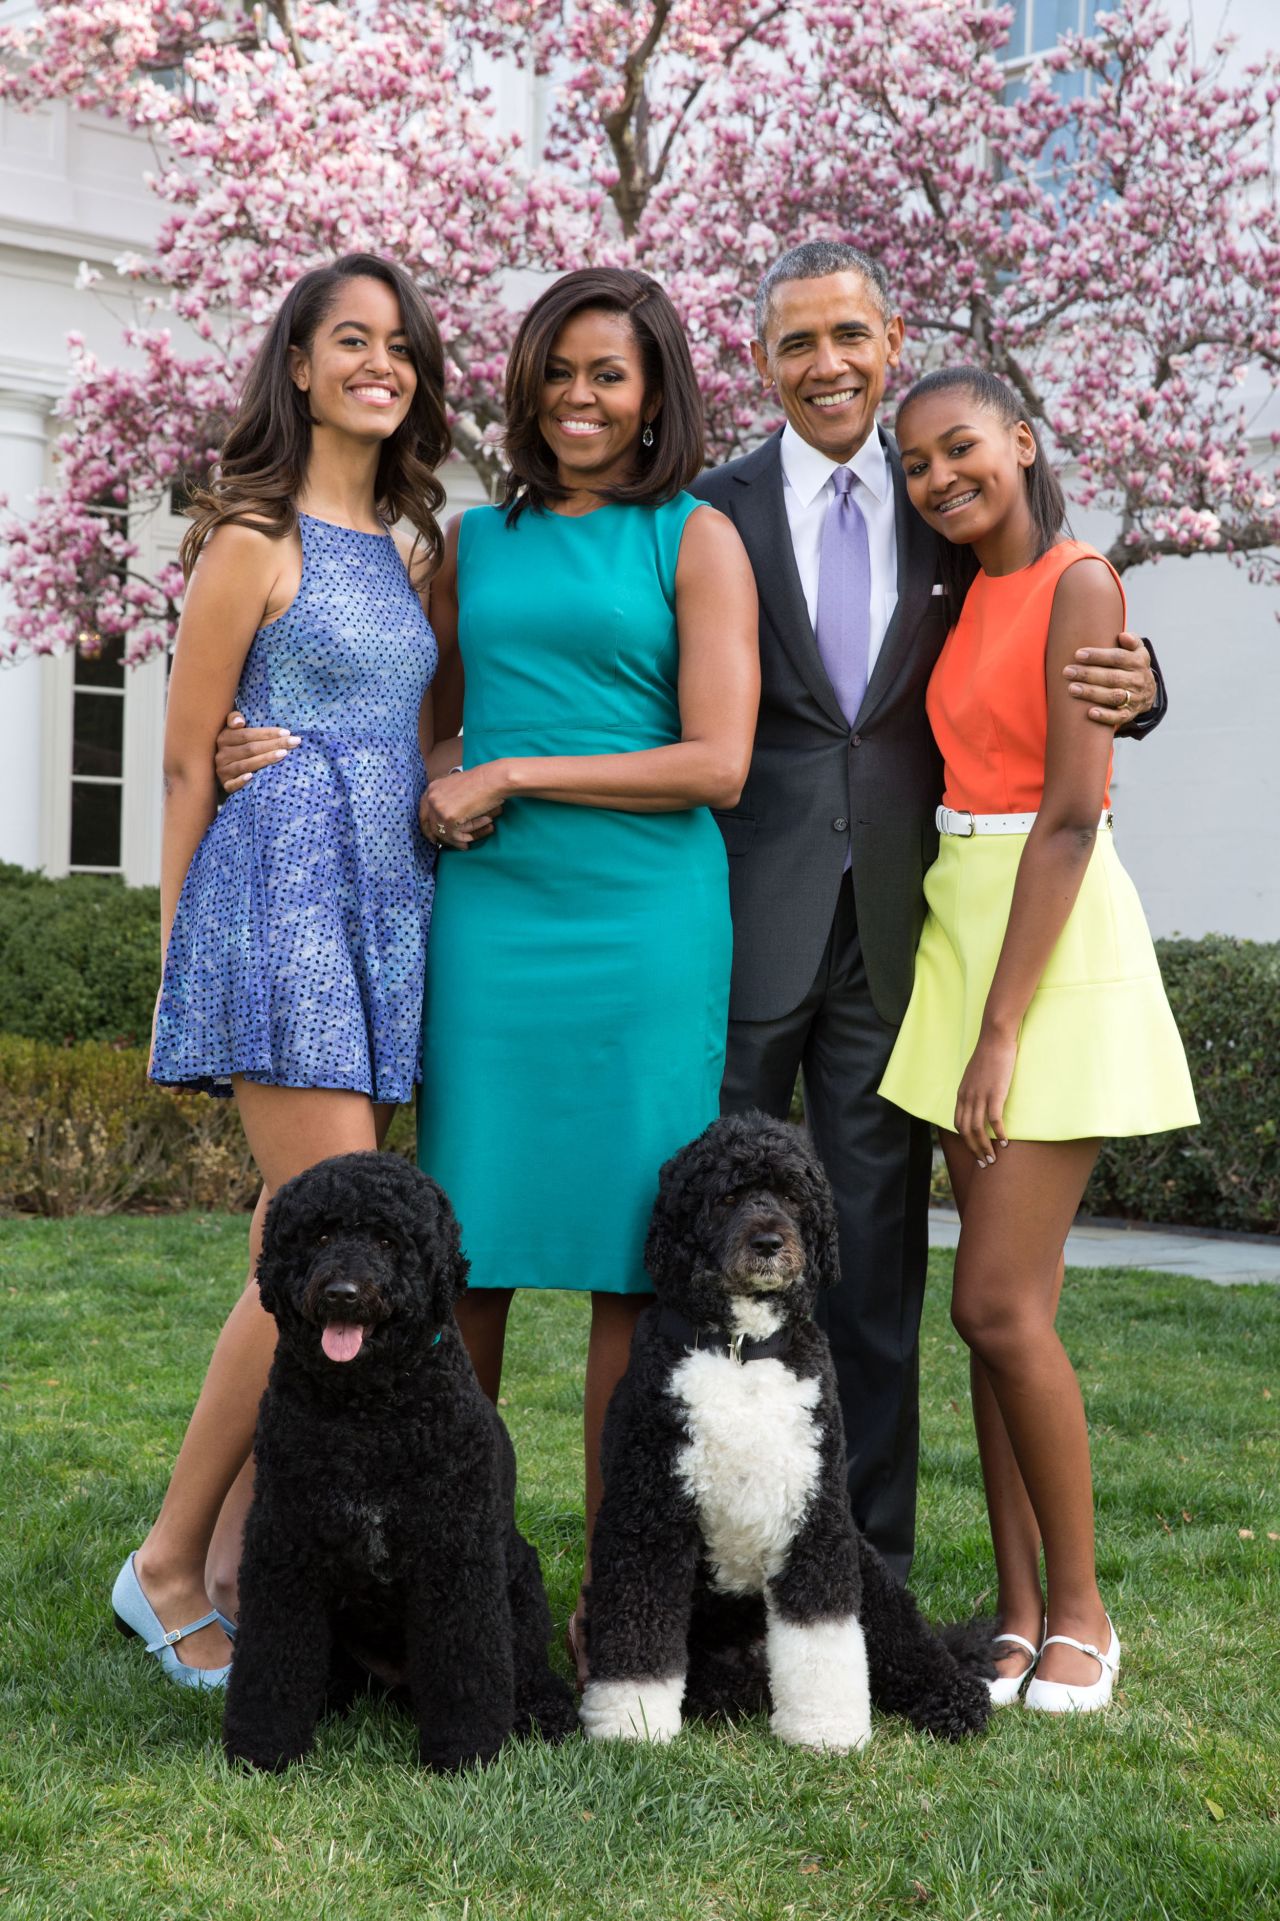 The Obama family, including daughters Malia (left) and Sasha (right), pose for a portrait with their pets Bo and Sunny in the Rose Garden on April 5, 2015.